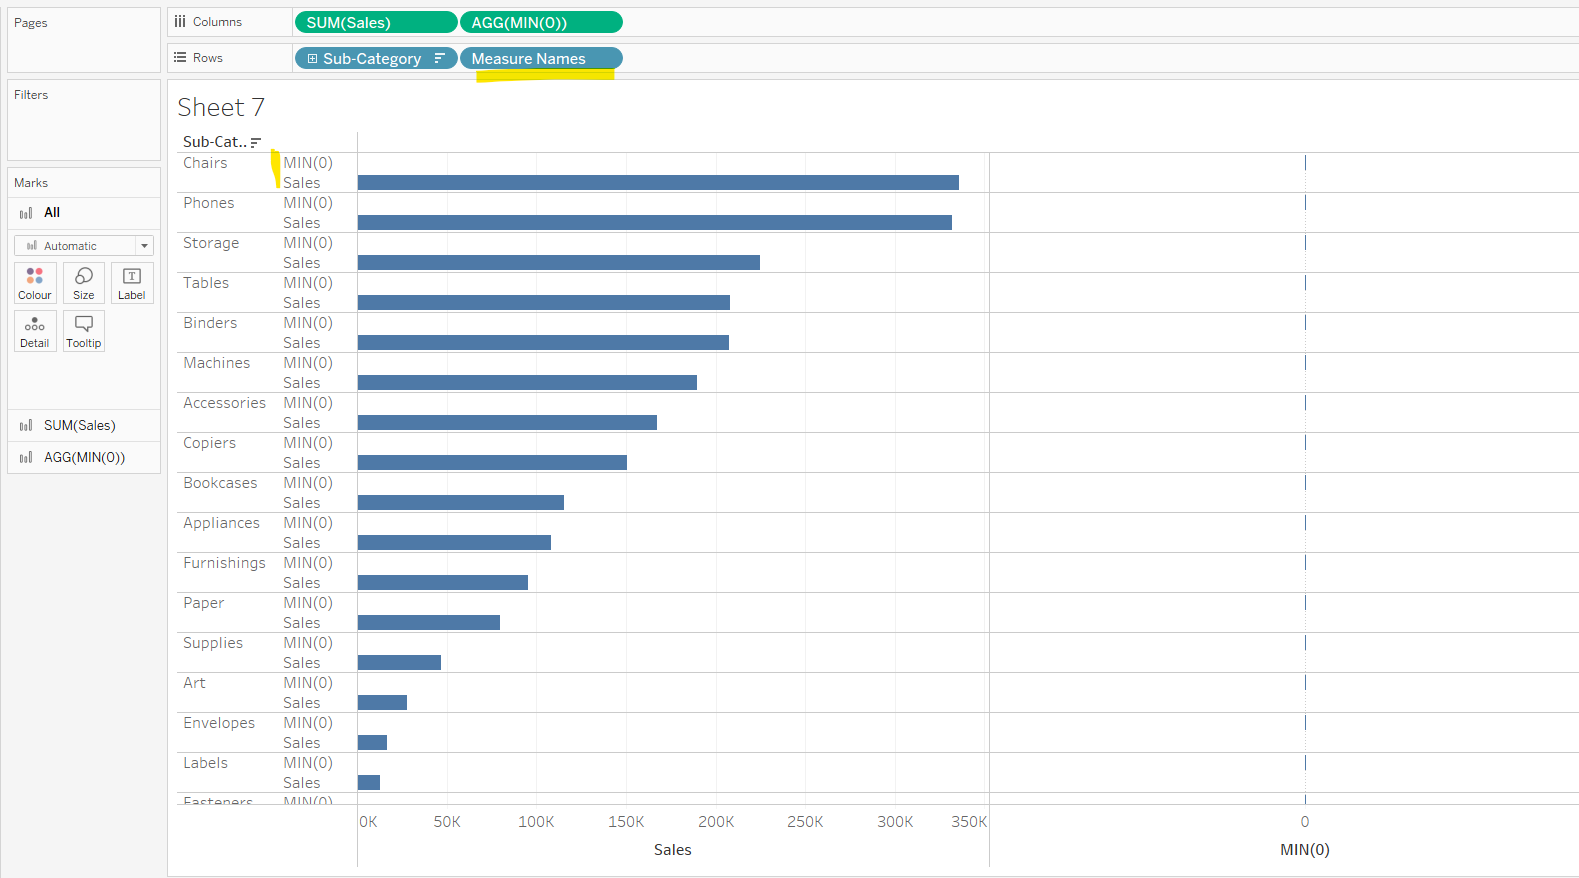 add Measure Names to Rows to create multiple rows on a horizontal bar chart in Tableau